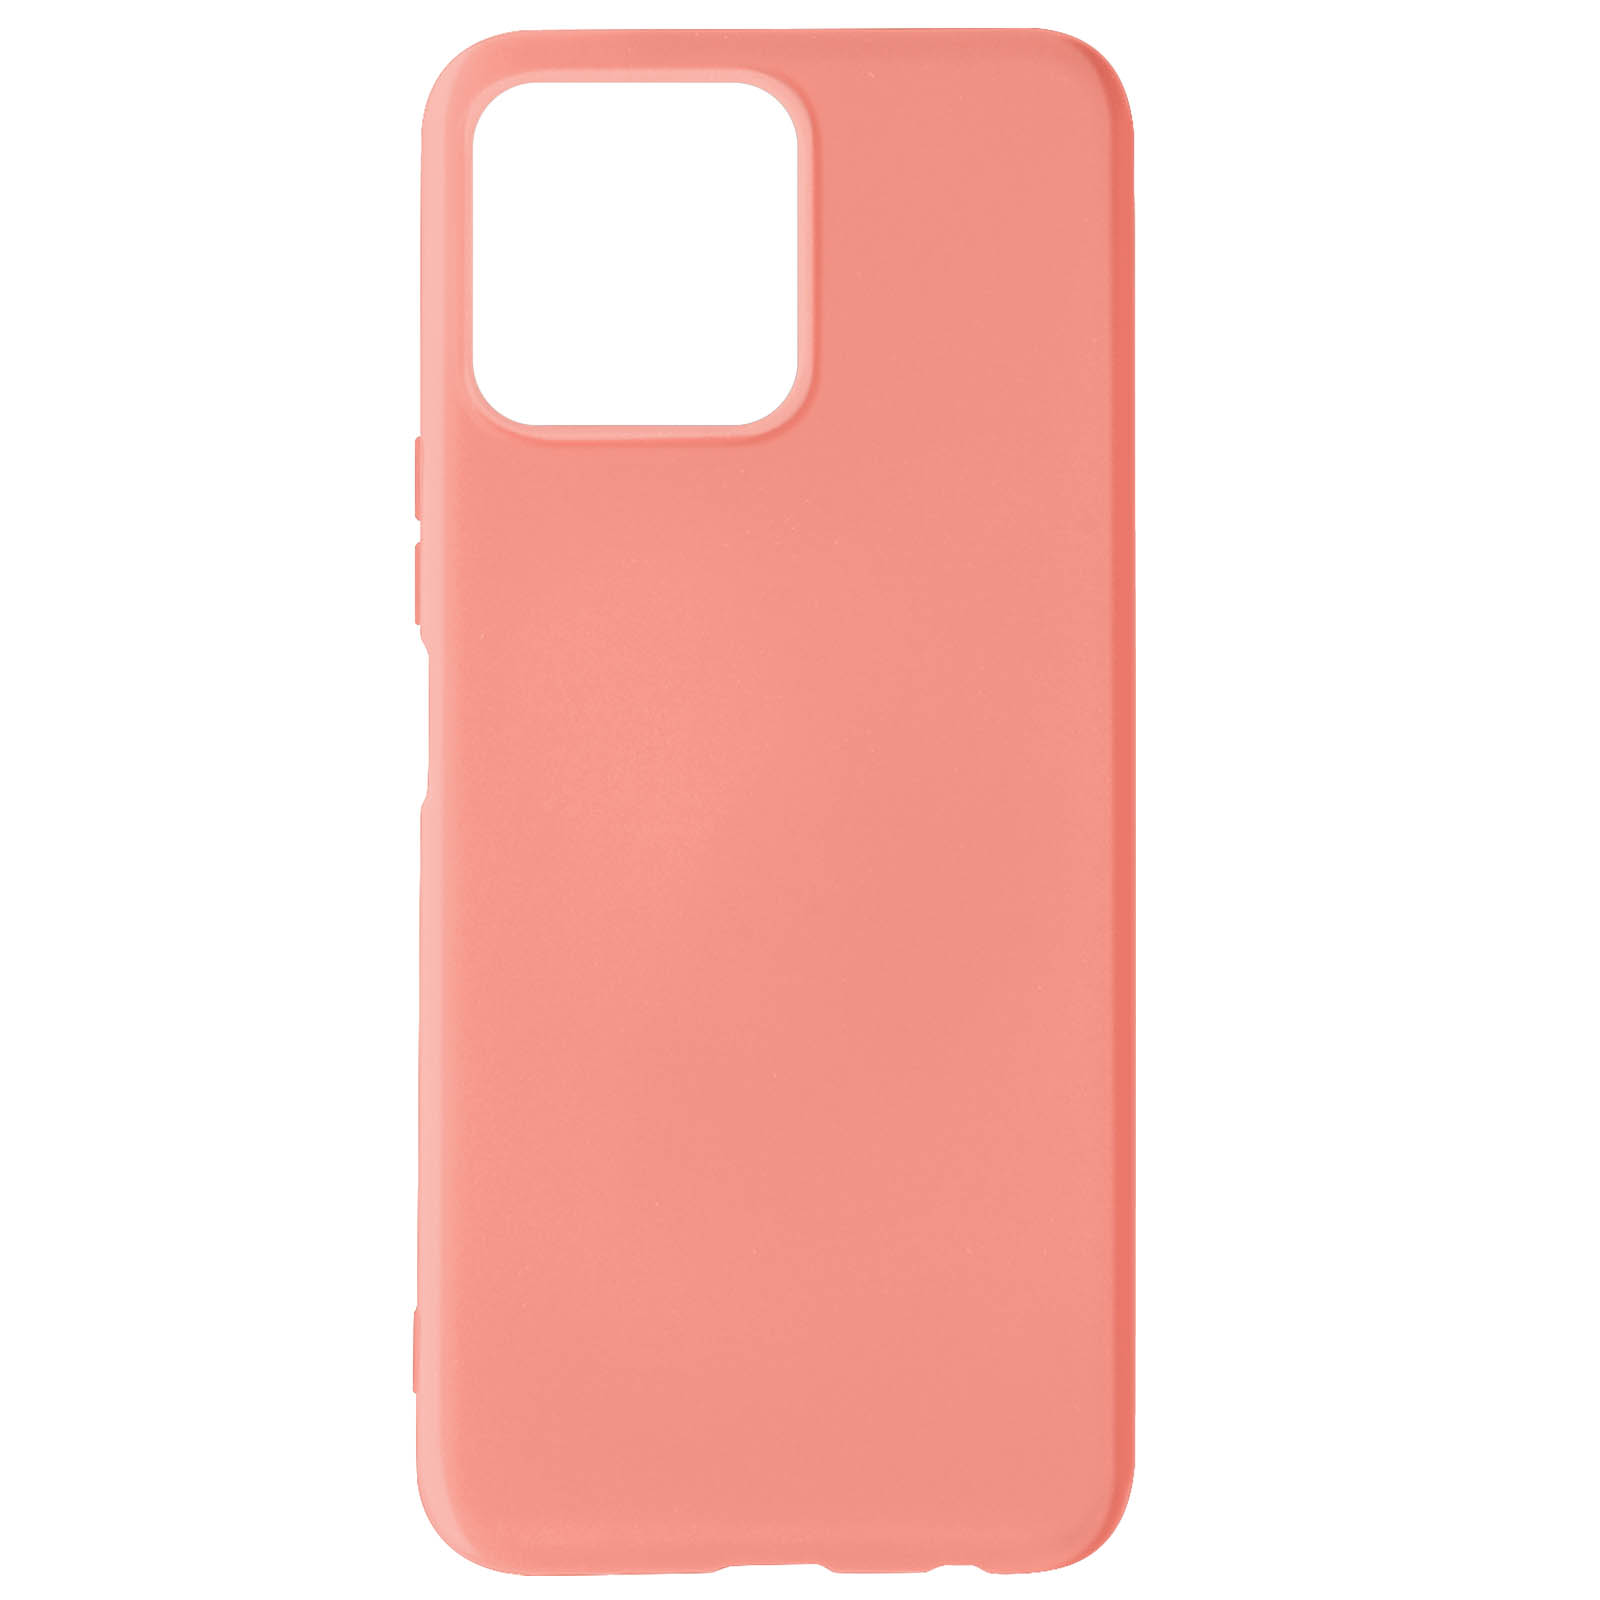 Touch X8, AVIZAR Honor Soft Honor, Rosa Series, Backcover,